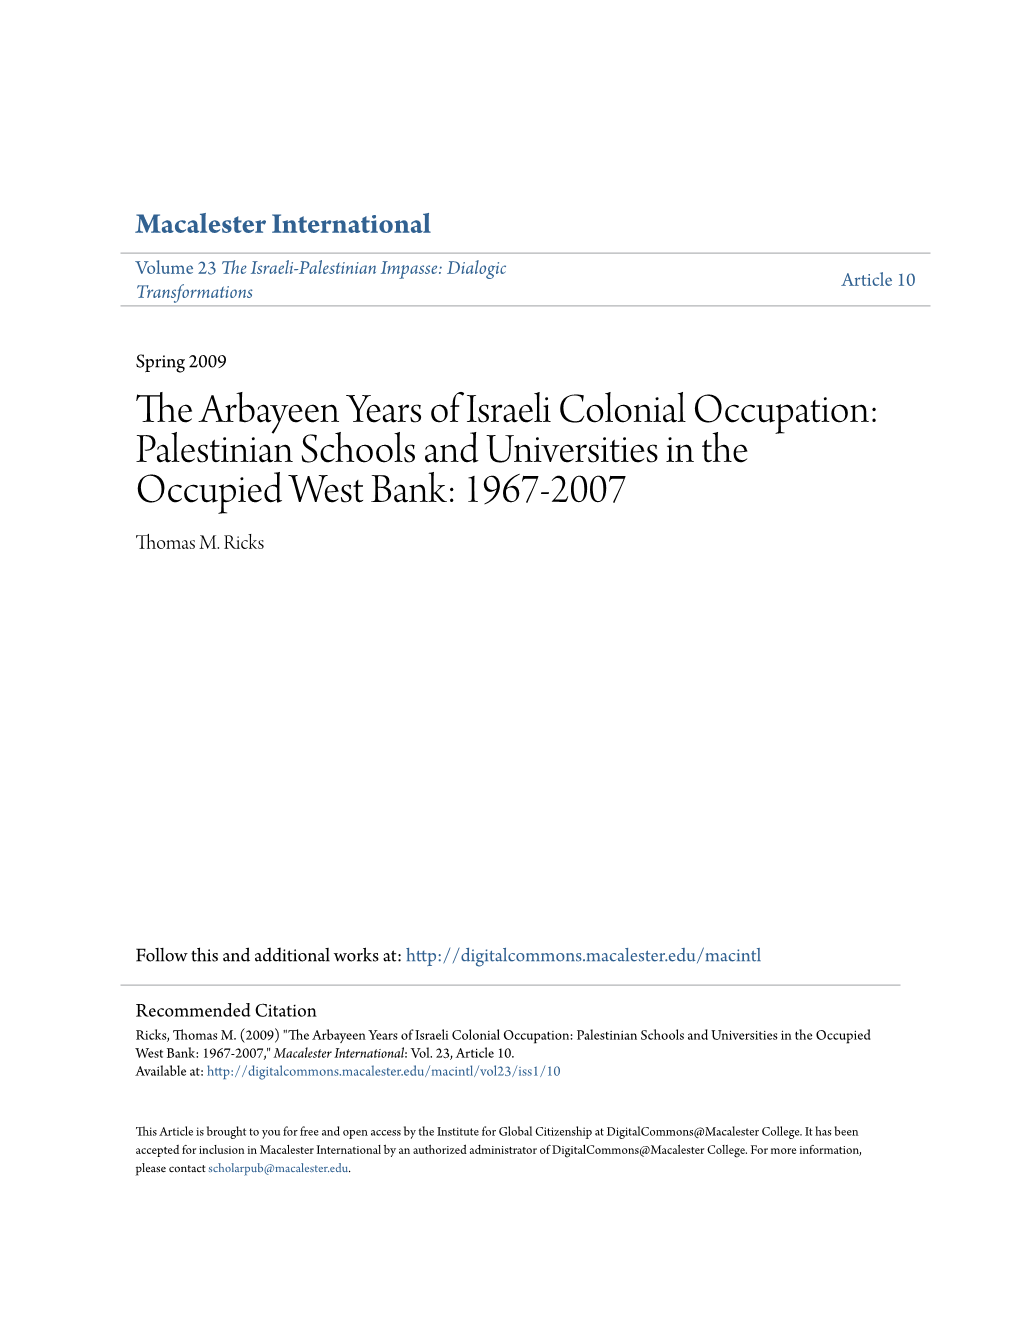 Palestinian Schools and Universities in the Occupied West Bank: 1967-2007 Thomas M